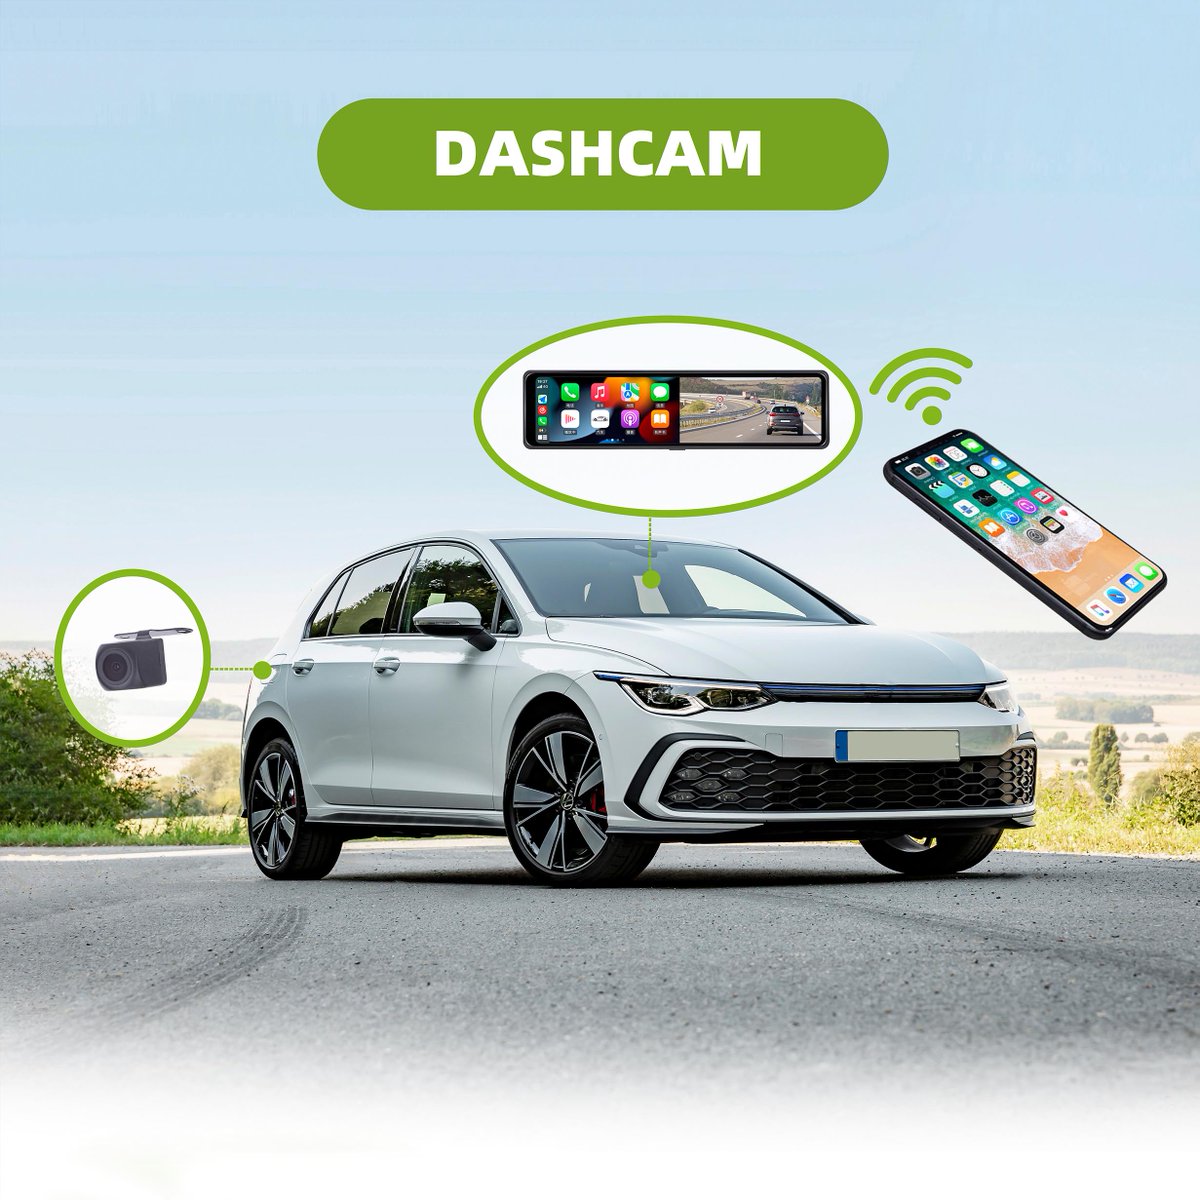 A dashcam not only records every emergency moment for you but also captures the thrilling moments during your drive
More in:luview.com/product/m1121-…
E-mail: sales@luview.com.
#LUVIEW #incarsecurity #streamingmediarearviewmirror #HDDASHCAM #VehicleBlackbox #electronicrearviewmirror